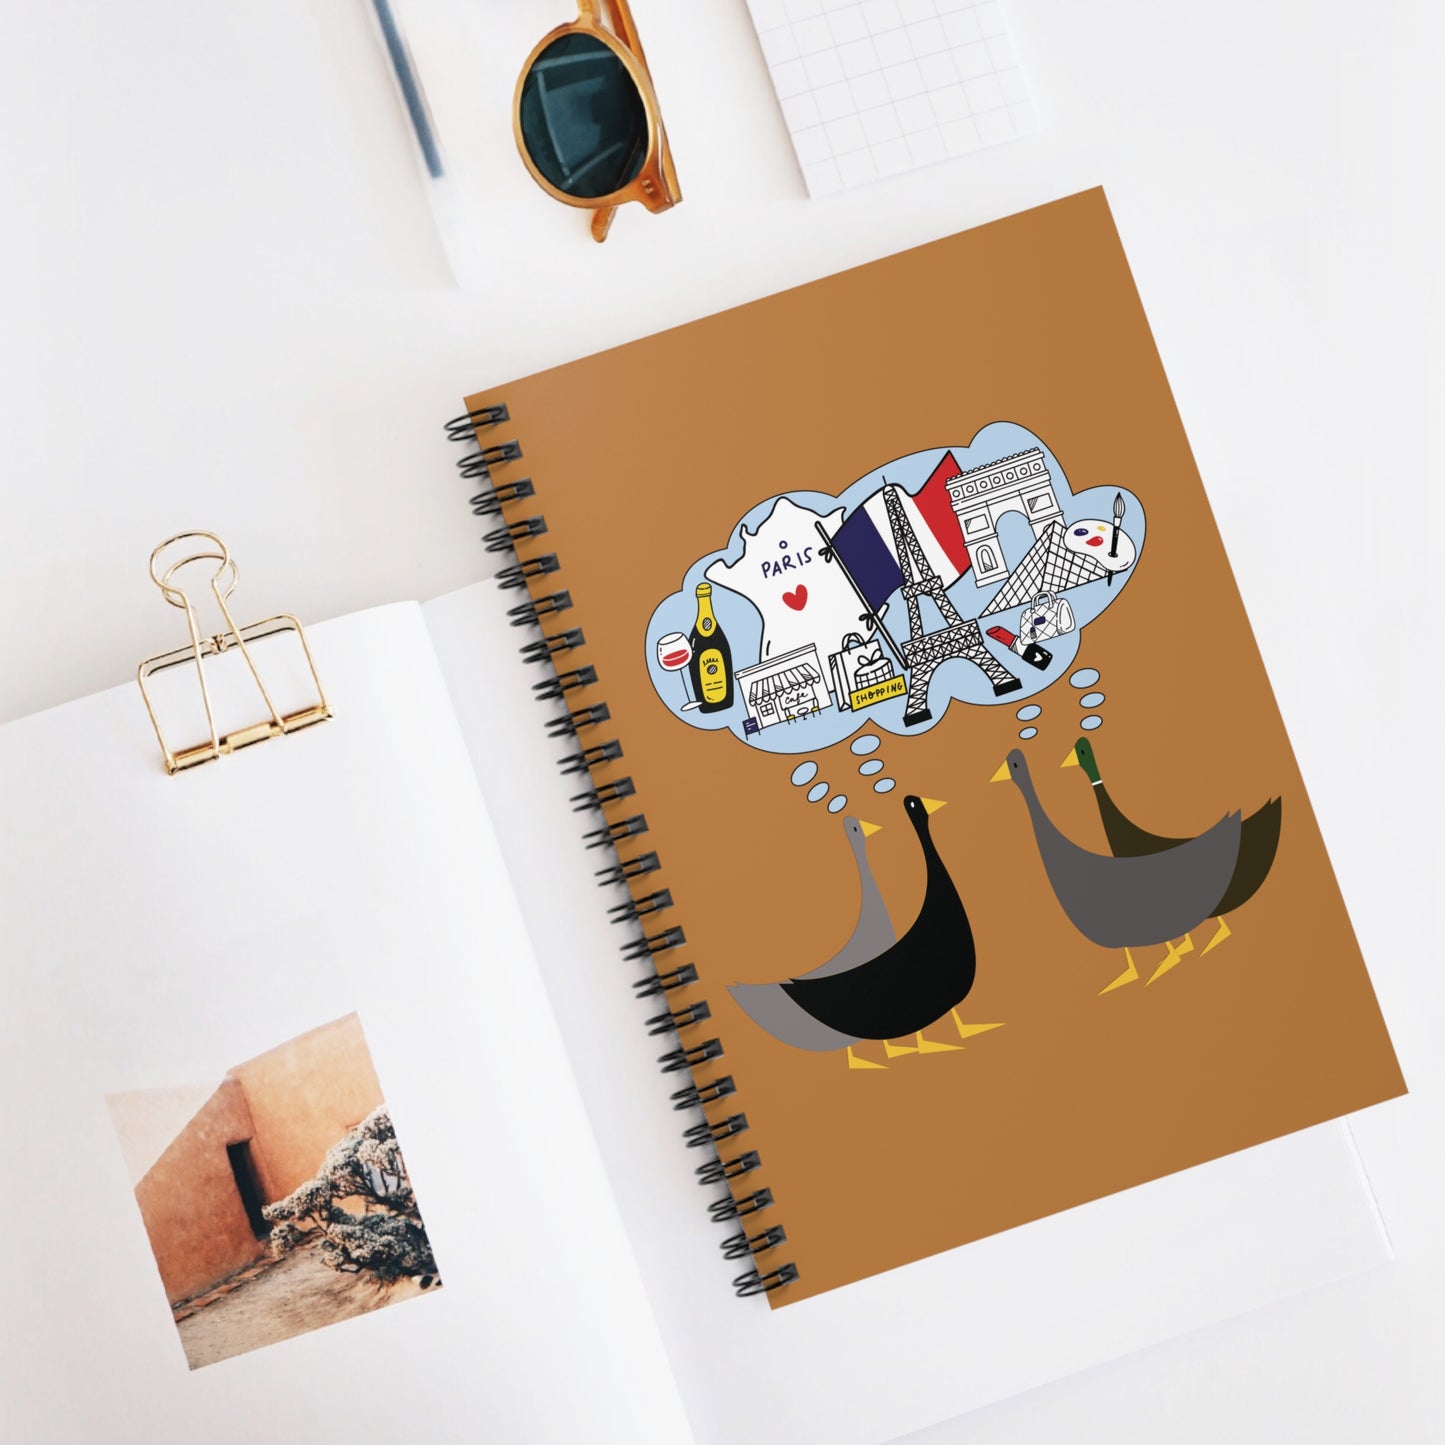 Ducks dreaming of Paris - Brandy Punch be8042 - Spiral Notebook - Ruled Line